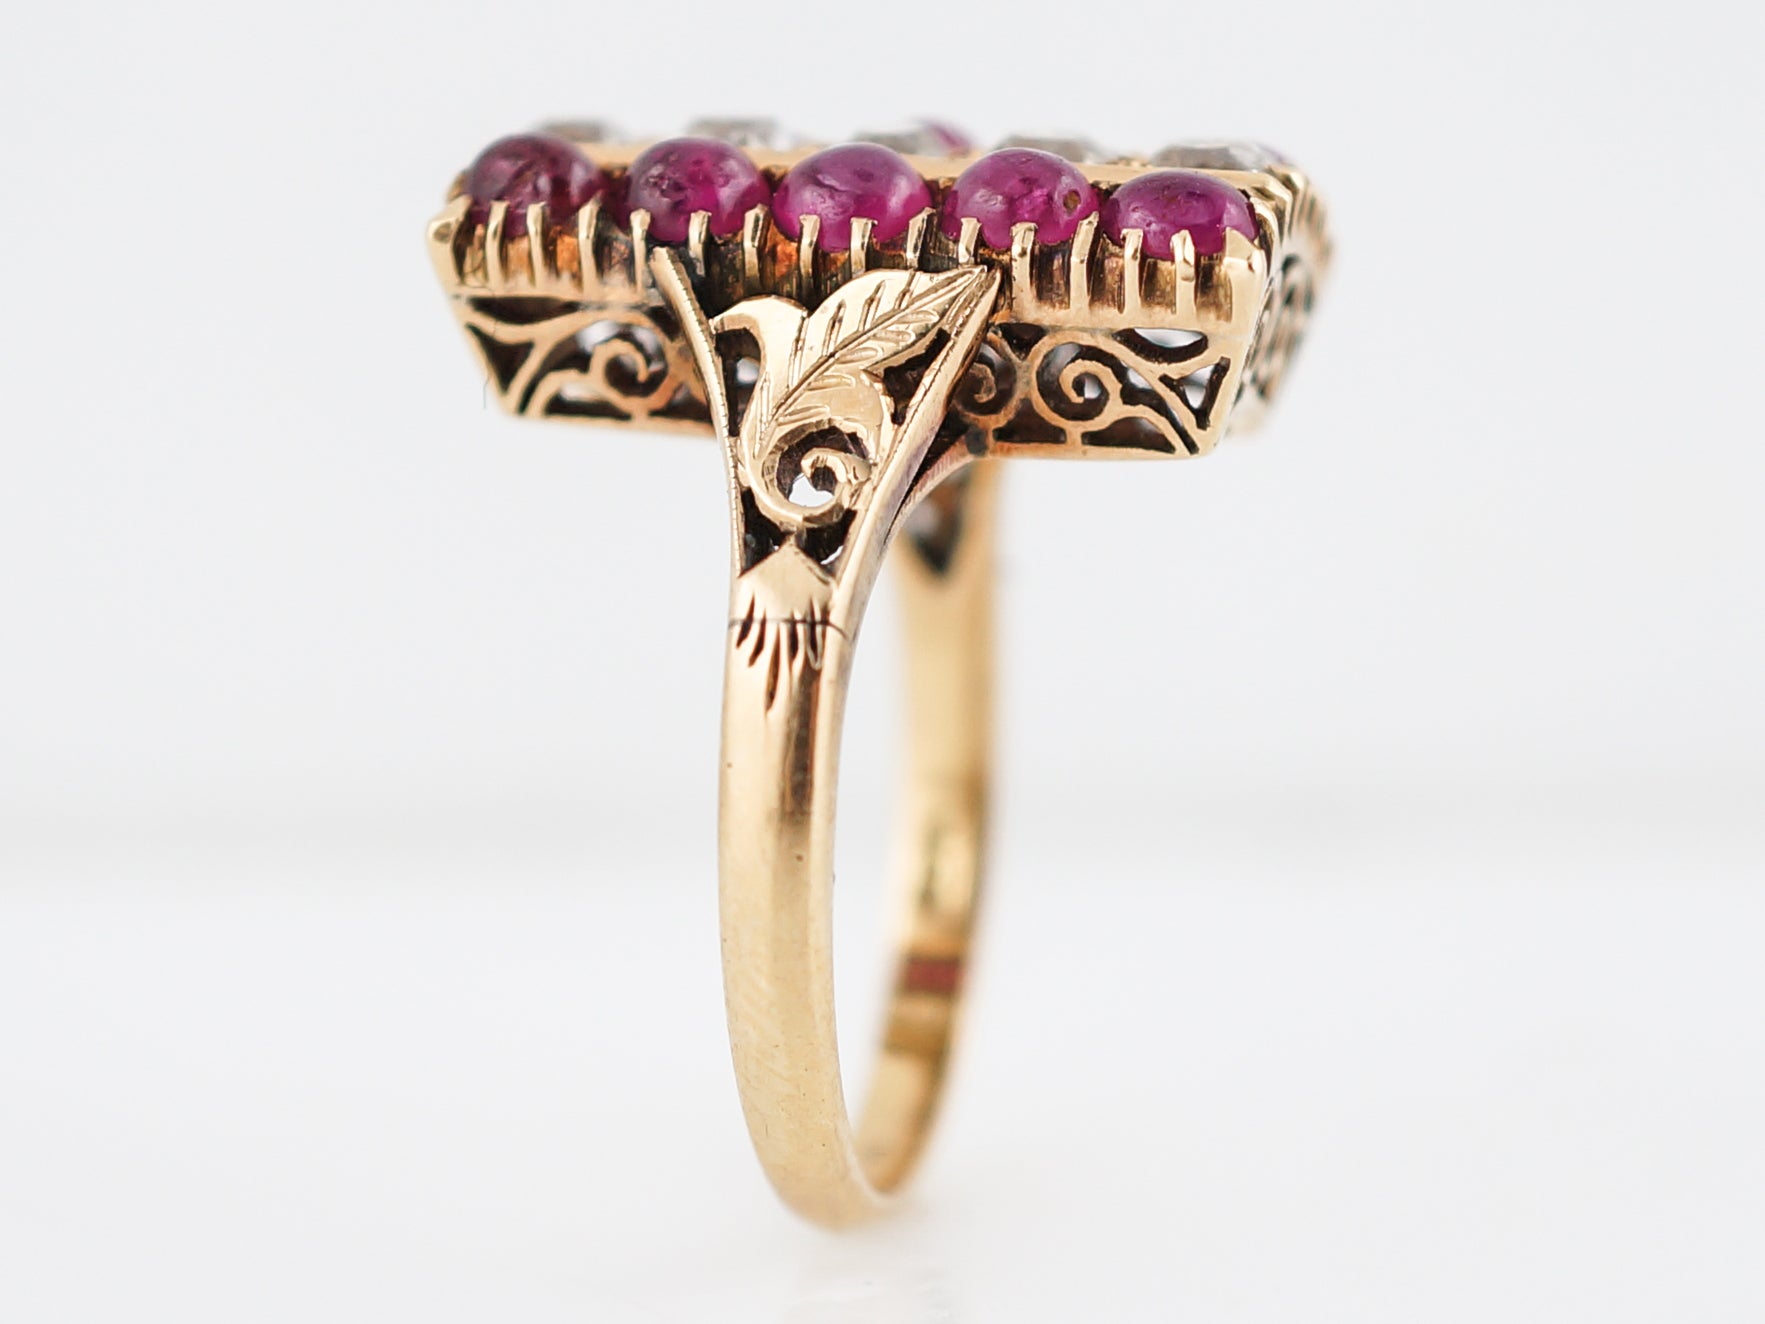 Vintage Cocktail Ring Retro 1.03 Old European Cut Diamond & Cabochon Cut Ruby in 18k Yellow Gold